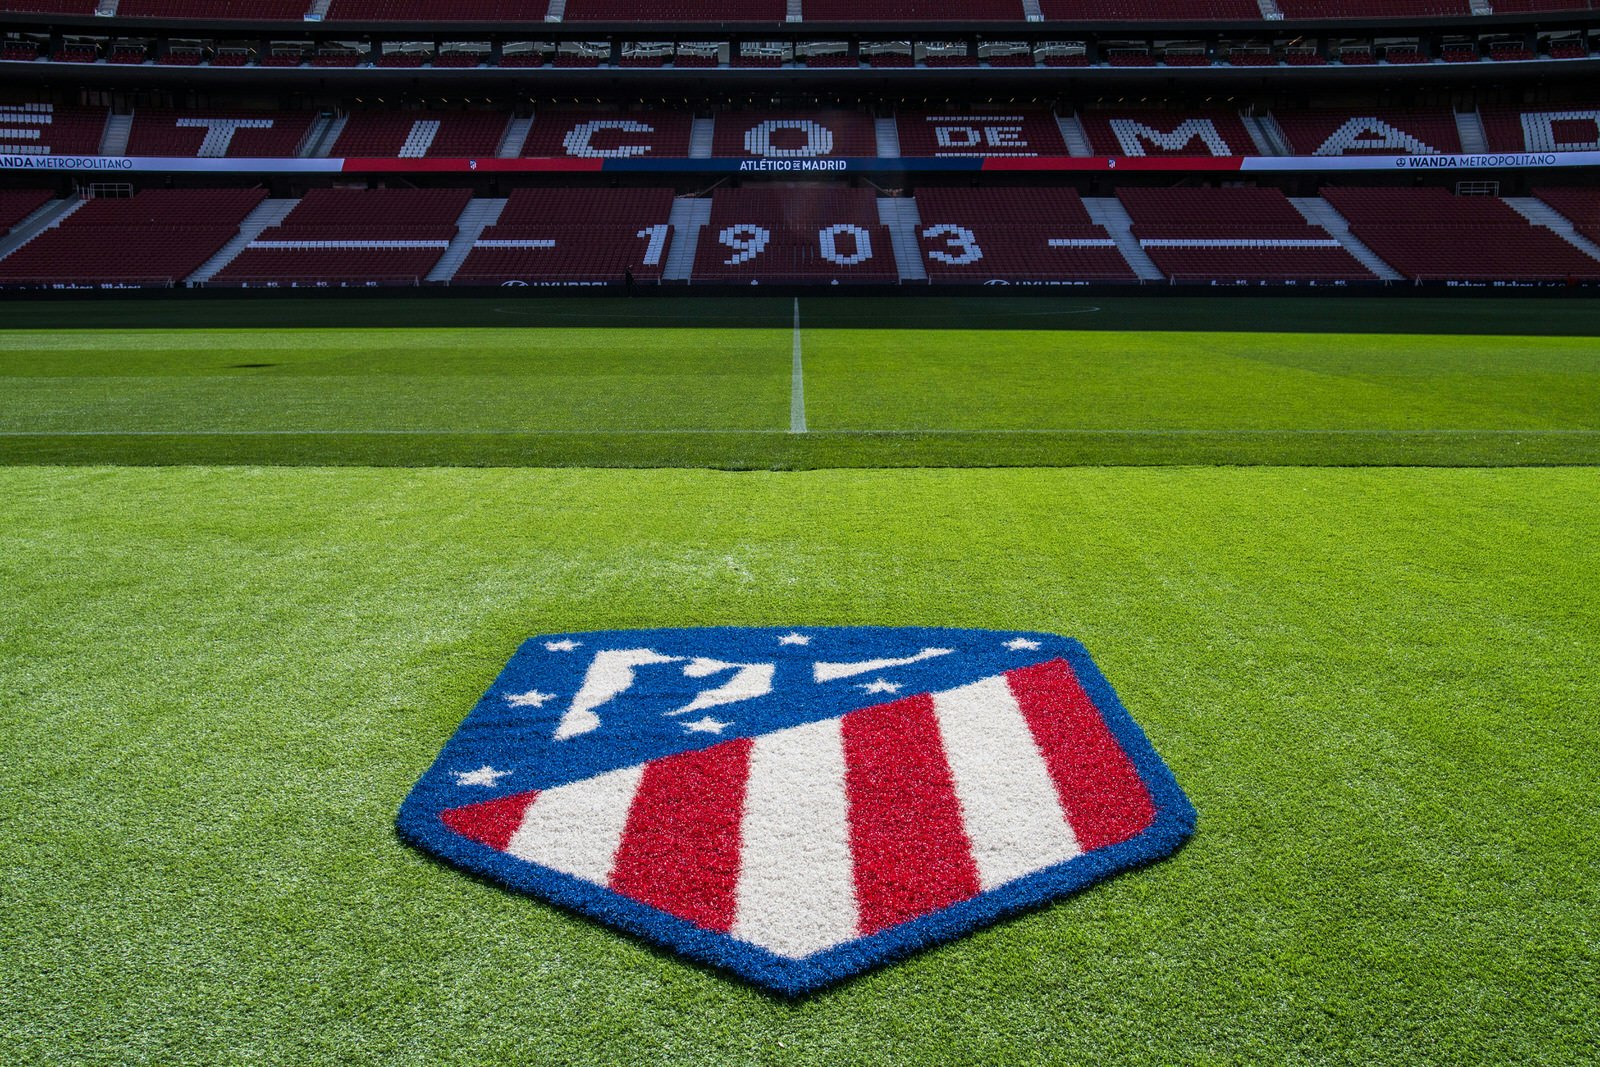 The Atlético Madrid badge on the pitch in the Wanda Metropolitano stadium, which is hosting the Champions League Final